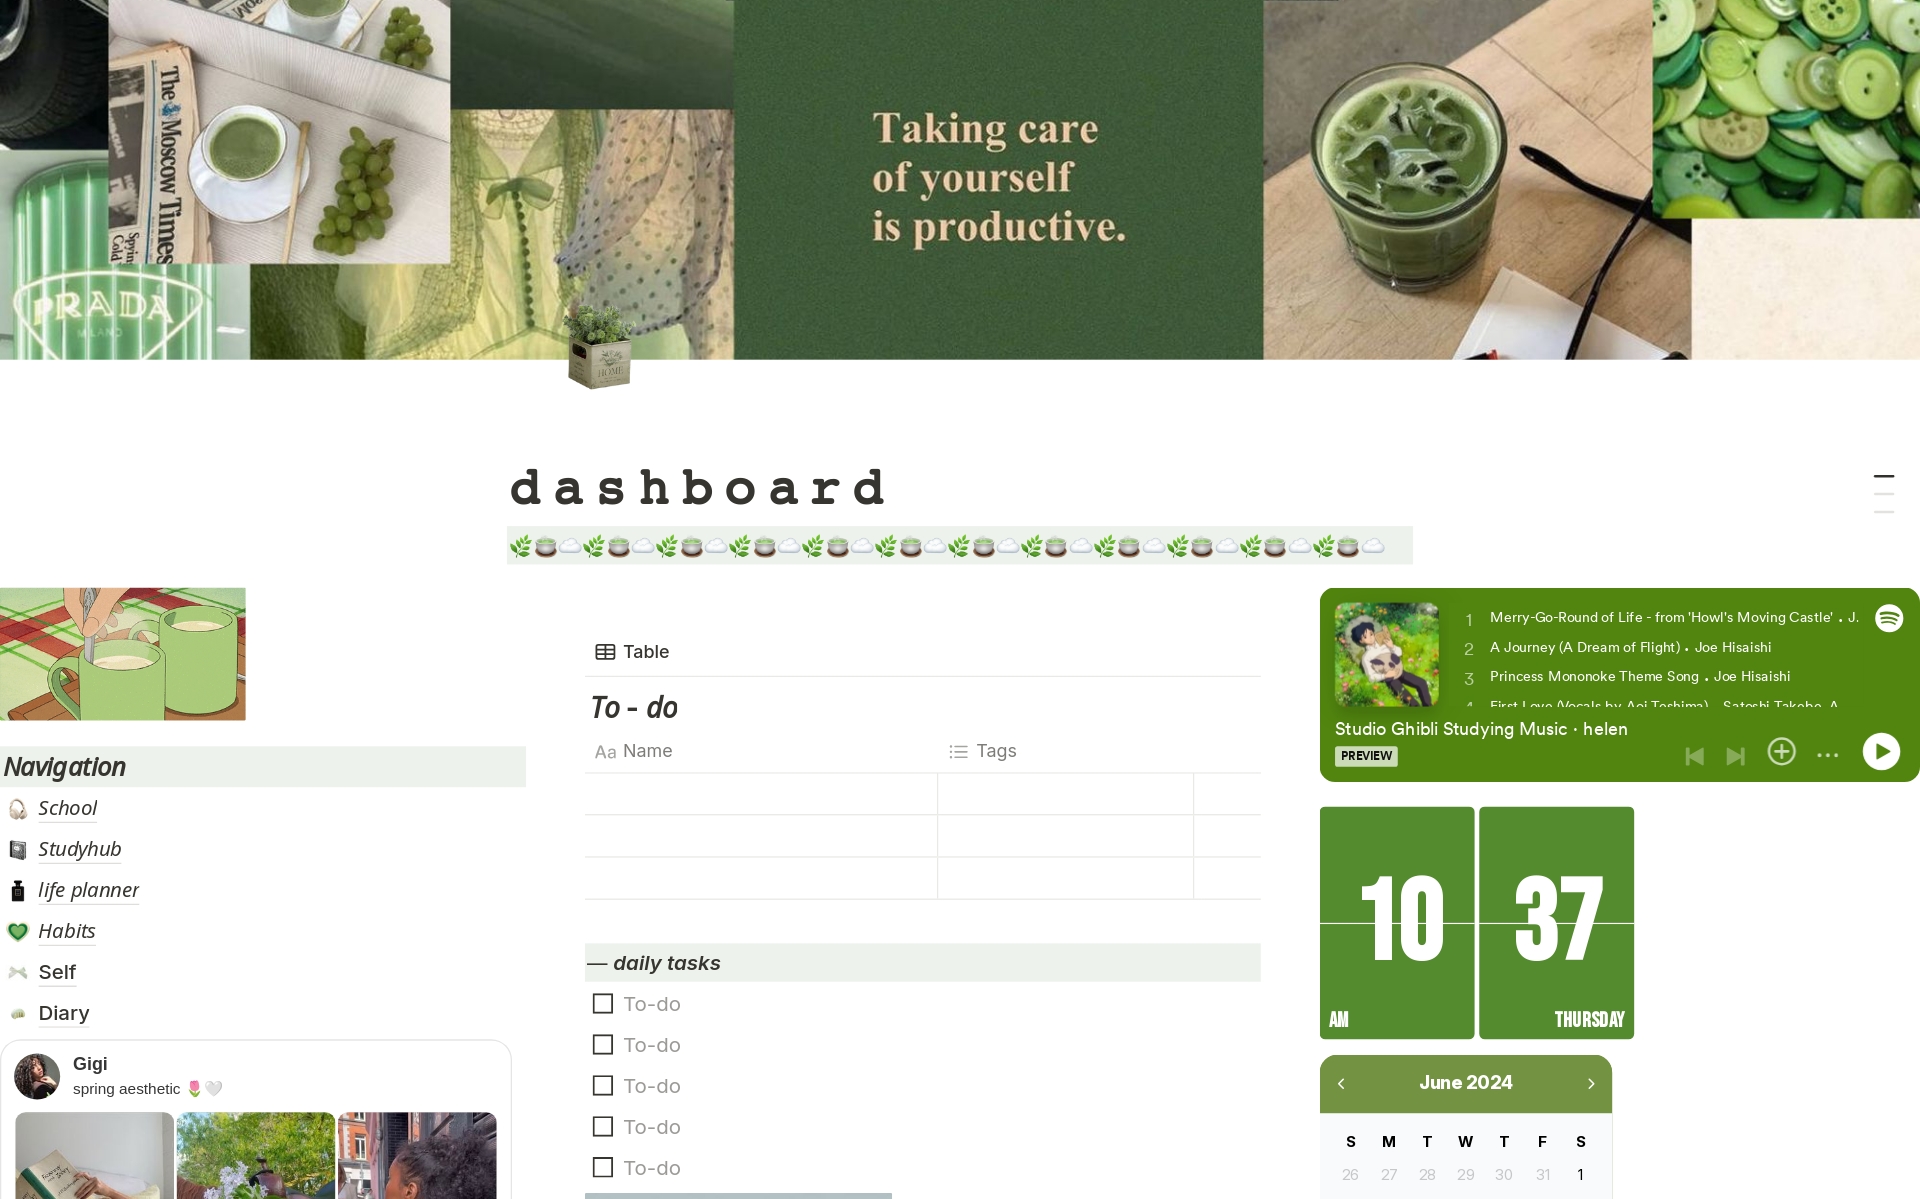 Hey! This is a cute little matcha dashboard!
shout-out to Gigi for using her Pintrest board! lol